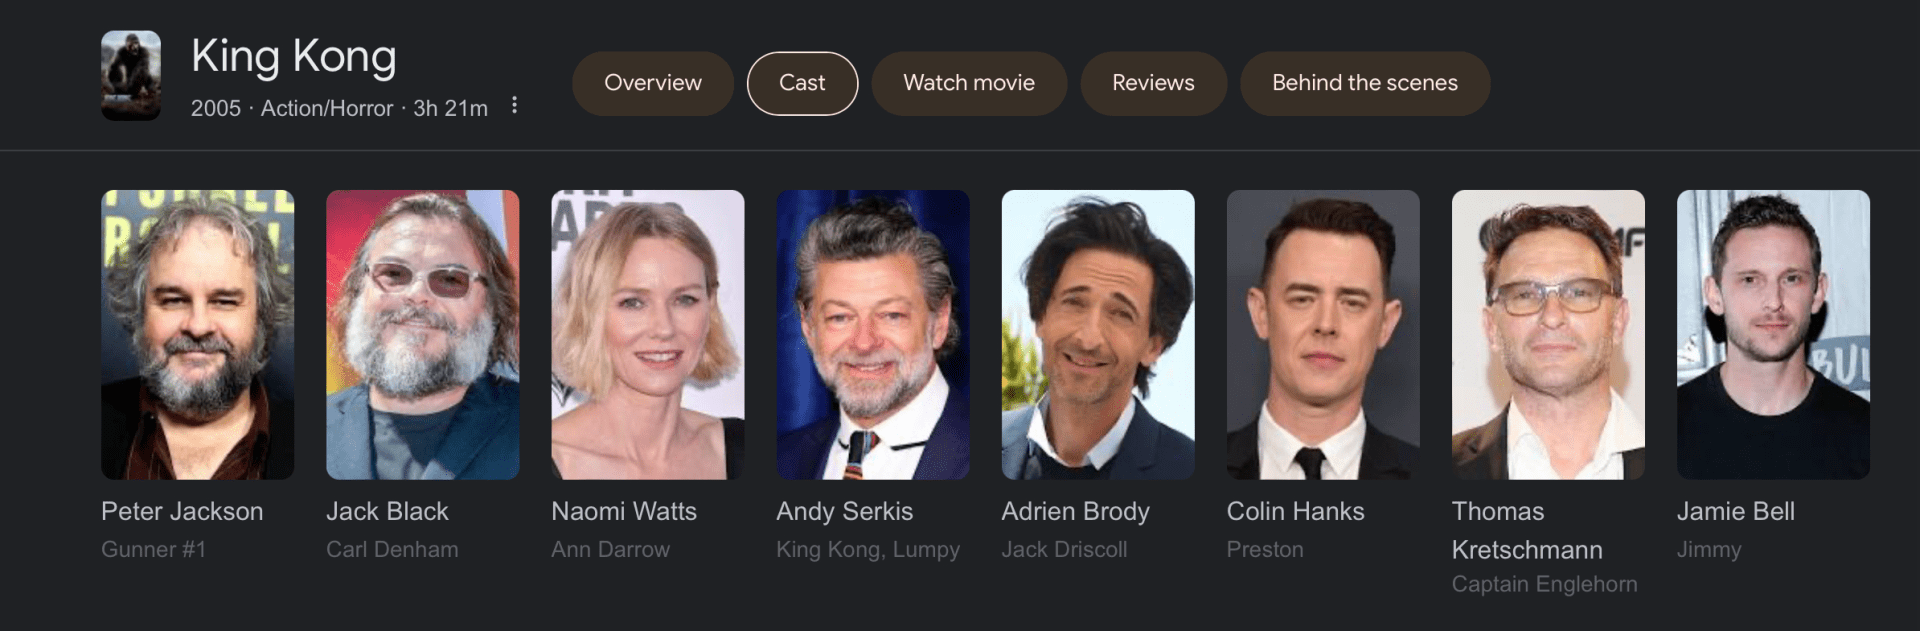 king kong 2005 cast - Google Search.png